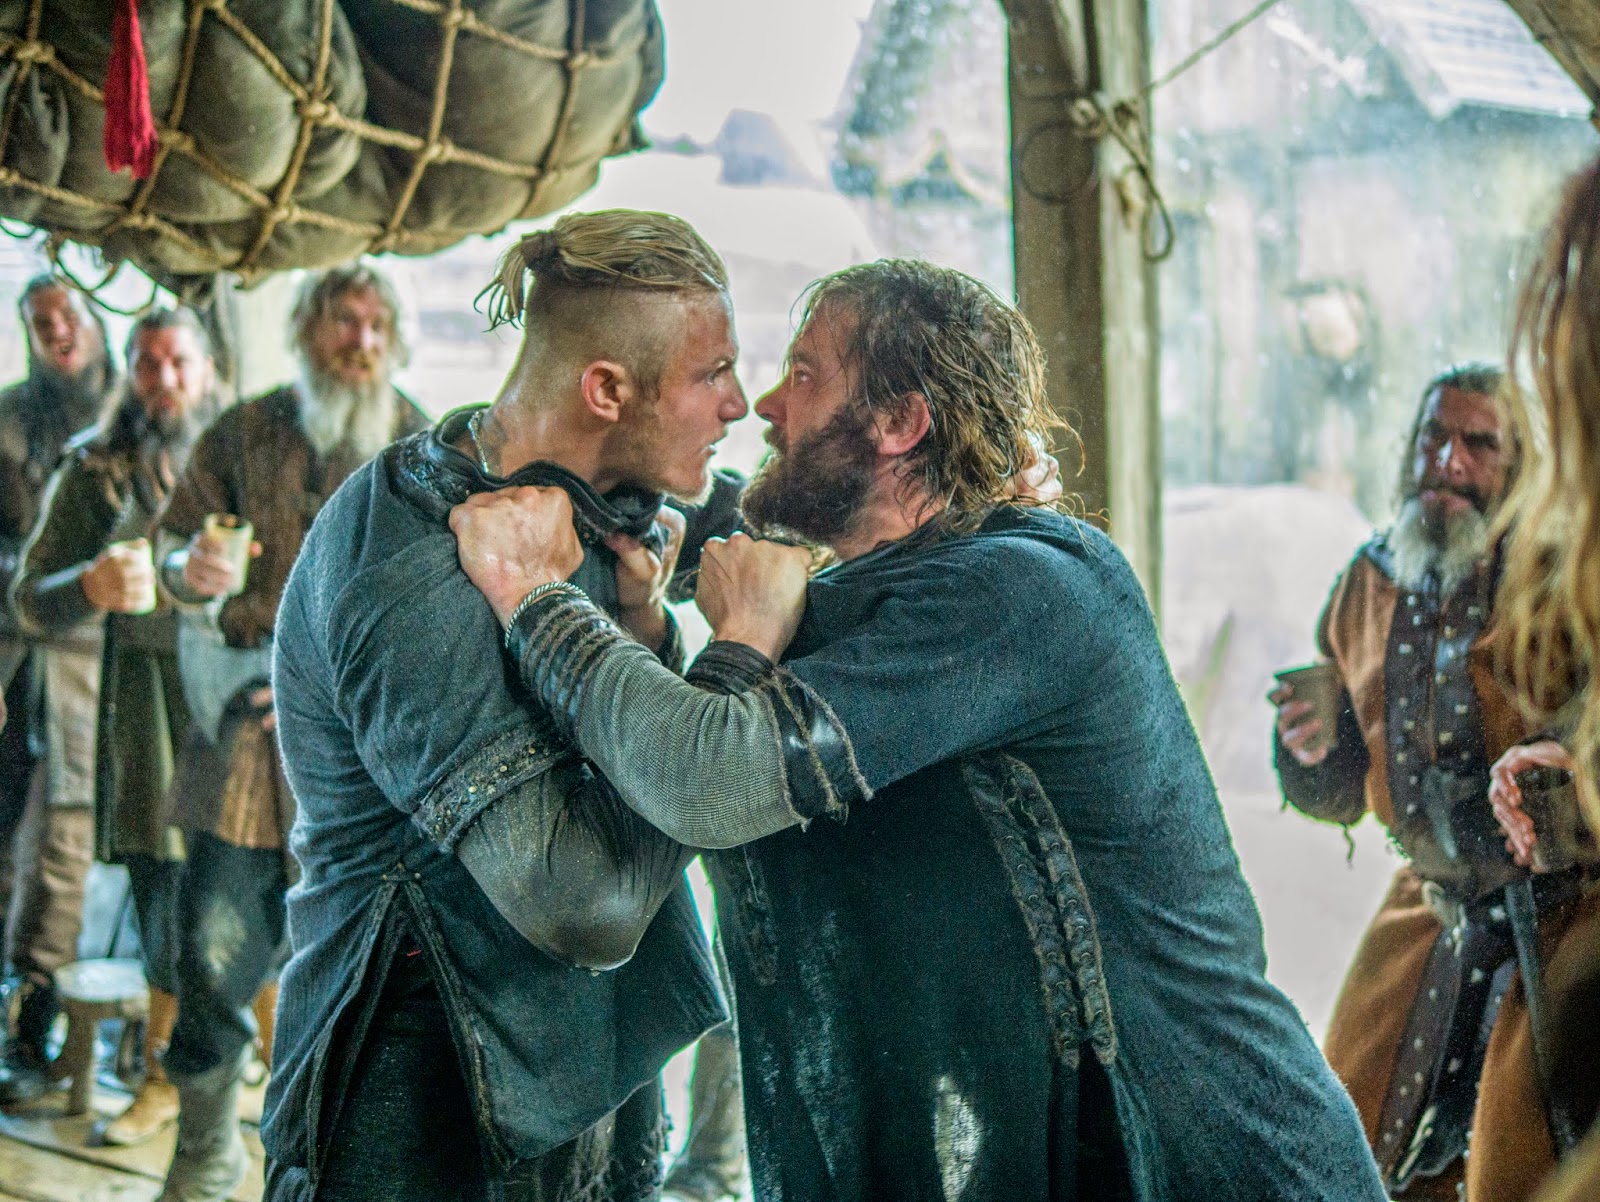 Vikings Season 3 New Clips & Photos From Episode 5 - sandwichjohnfilms